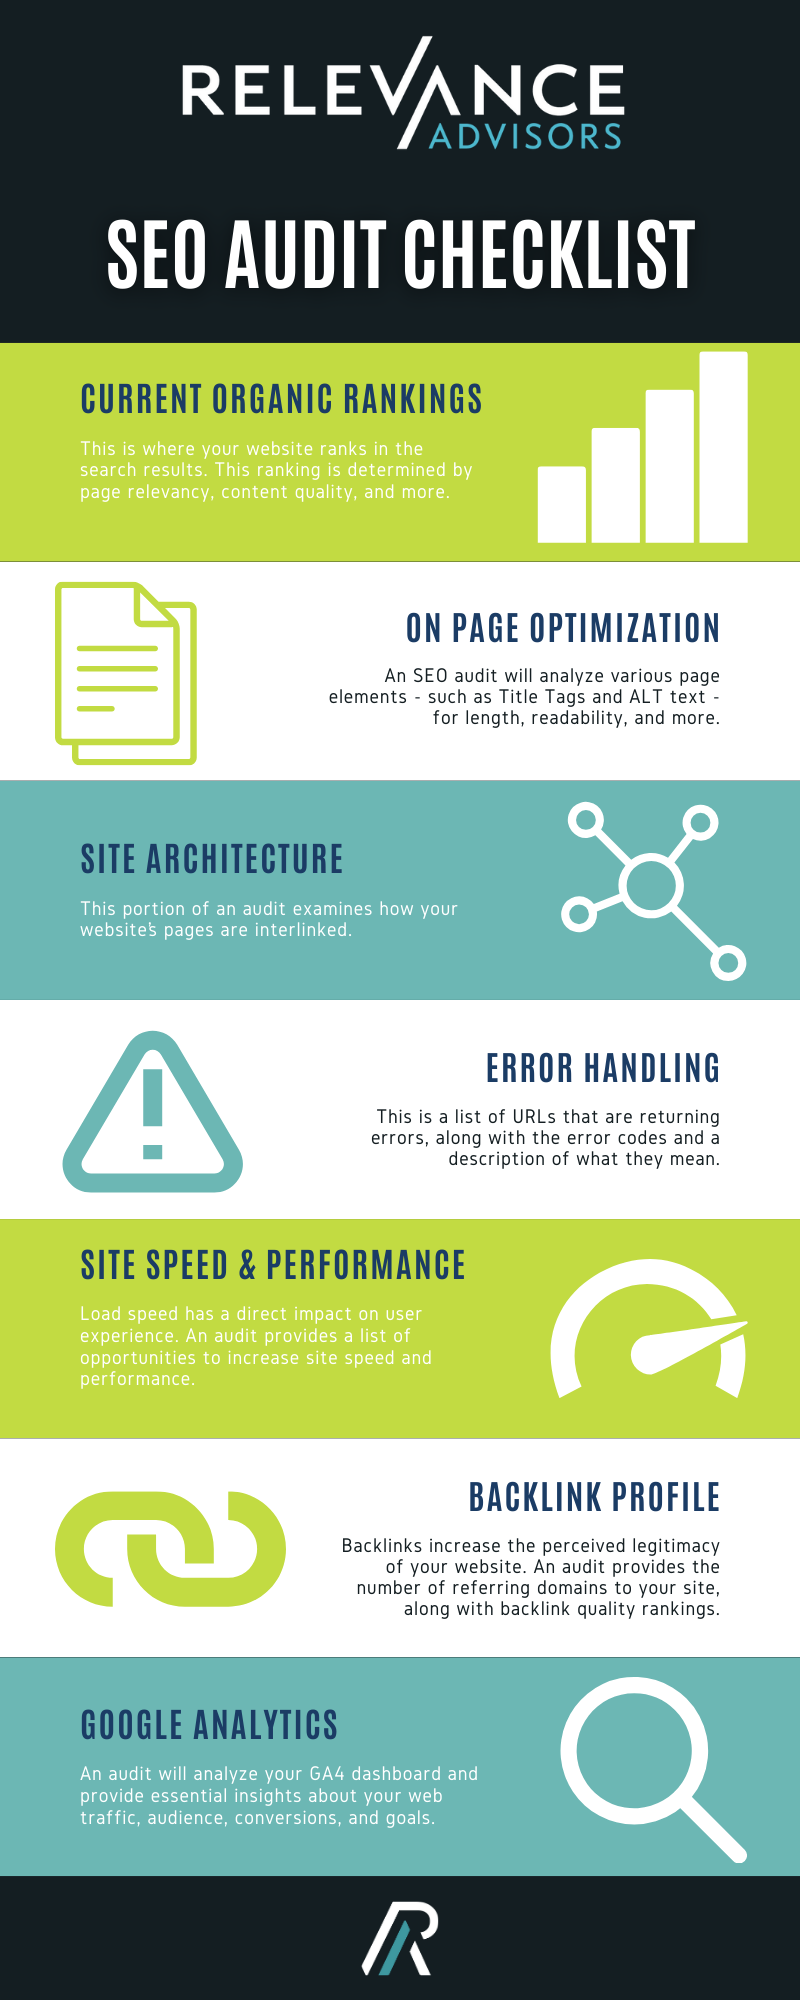 Short Description: Infographic listing components of an SEO Audit. Links to a blog titled The Blueprint for Successful SEO Audits.

Long Description: The graphic portrays seven components of an SEO Audit stacked vertically. Each row contains a short description and a related icon. The first row is titled Current Organic Rankings and reads, “This is where your website ranks in the search results. This ranking is determined by page relevancy, content quality, and more.” The second row is titled On Page Optimization and reads, “An SEO audit will analyze various page elements - such as Title Tags and ALT text - for length, readability, and more.” The third row is titled Site Architecture and reads, “This portion of an audit examines how your website’s pages are interlinked.” The fourth row is titled Error Handling and reads, “This is a list of URLs that are returning errors, along with the error codes and a description of what they mean.” The fifth row is titled Site Speed & Performance and reads, “Load speed has a direct impact on user experience. An audit provides a list of opportunities to increase site speed and performance.” The sixth row is titled Backlink Profile and reads, “Backlinks increase the perceived legitimacy of your website. An audit provides the number of referring domains to your site, along with backlink quality rankings.” The seventh row is titled Google Analytics and reads, “An audit will analyze your GA4 dashboard and provide essential insights about your web traffic, audience, conversions, and goals.”